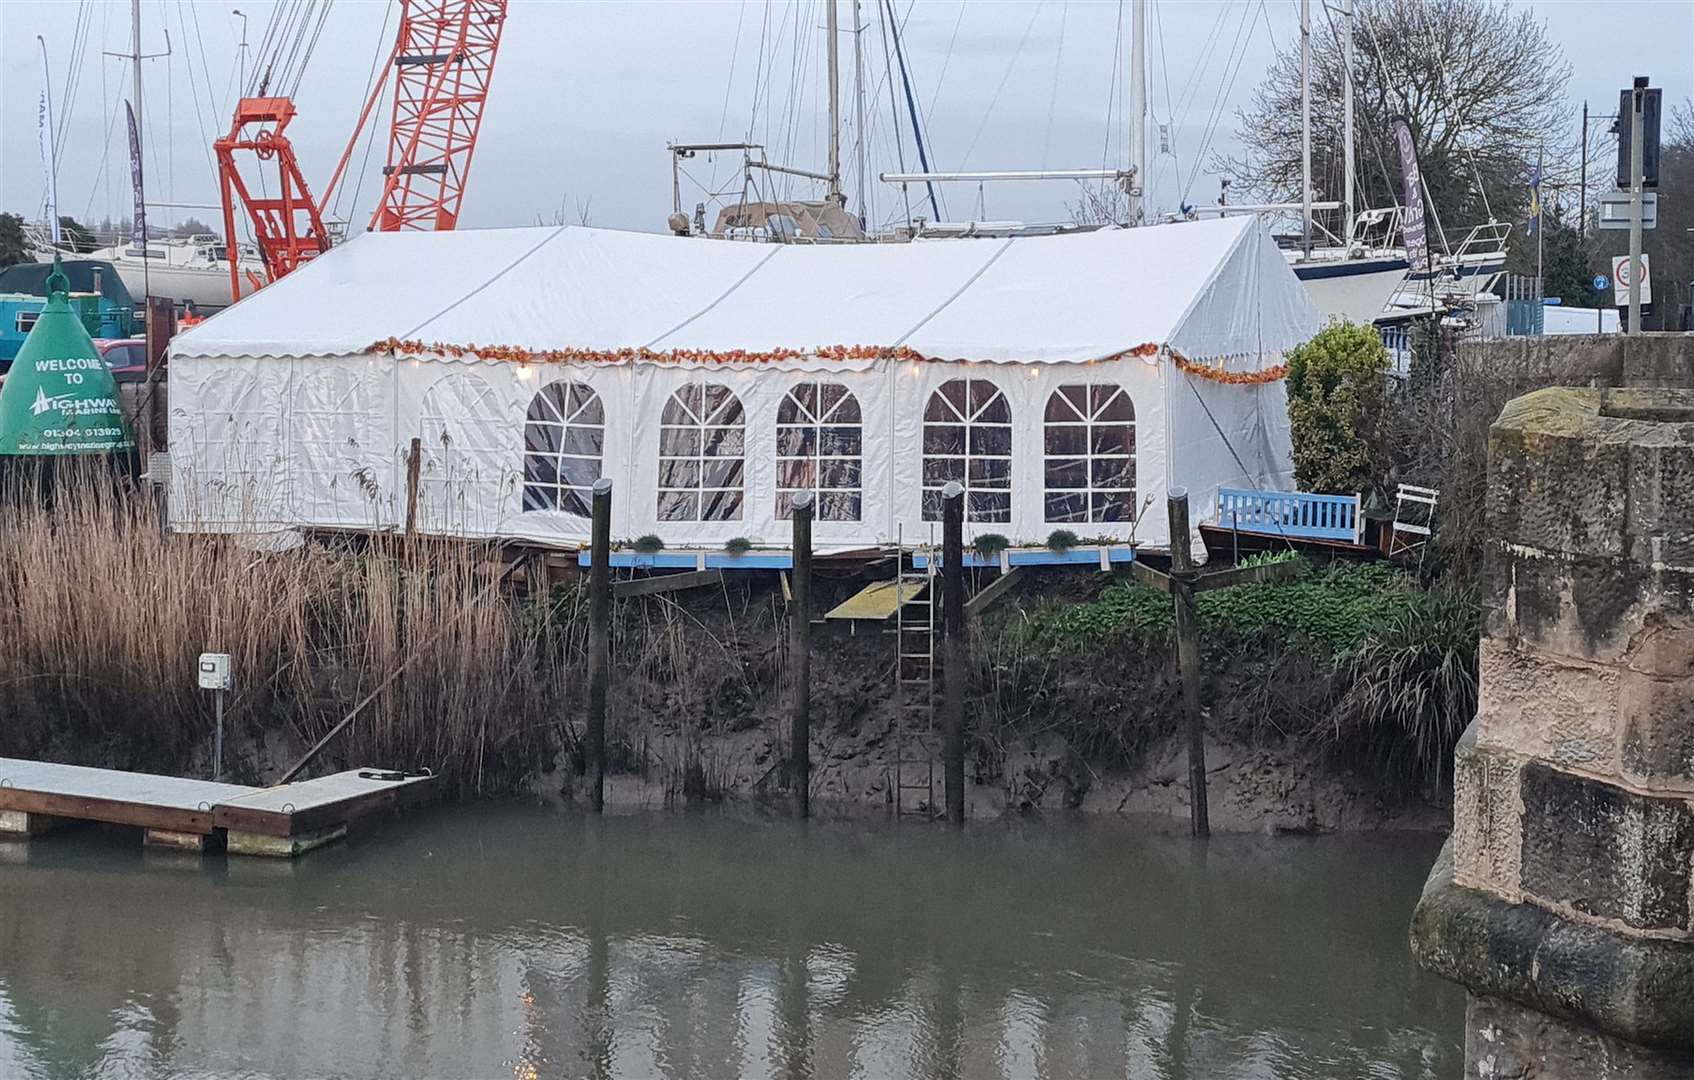 The Quayside Bar and Grill in Sandwich has grown from a simple food wagon and a few chairs beside the river to a large marquee with dining tables and comfy sofas